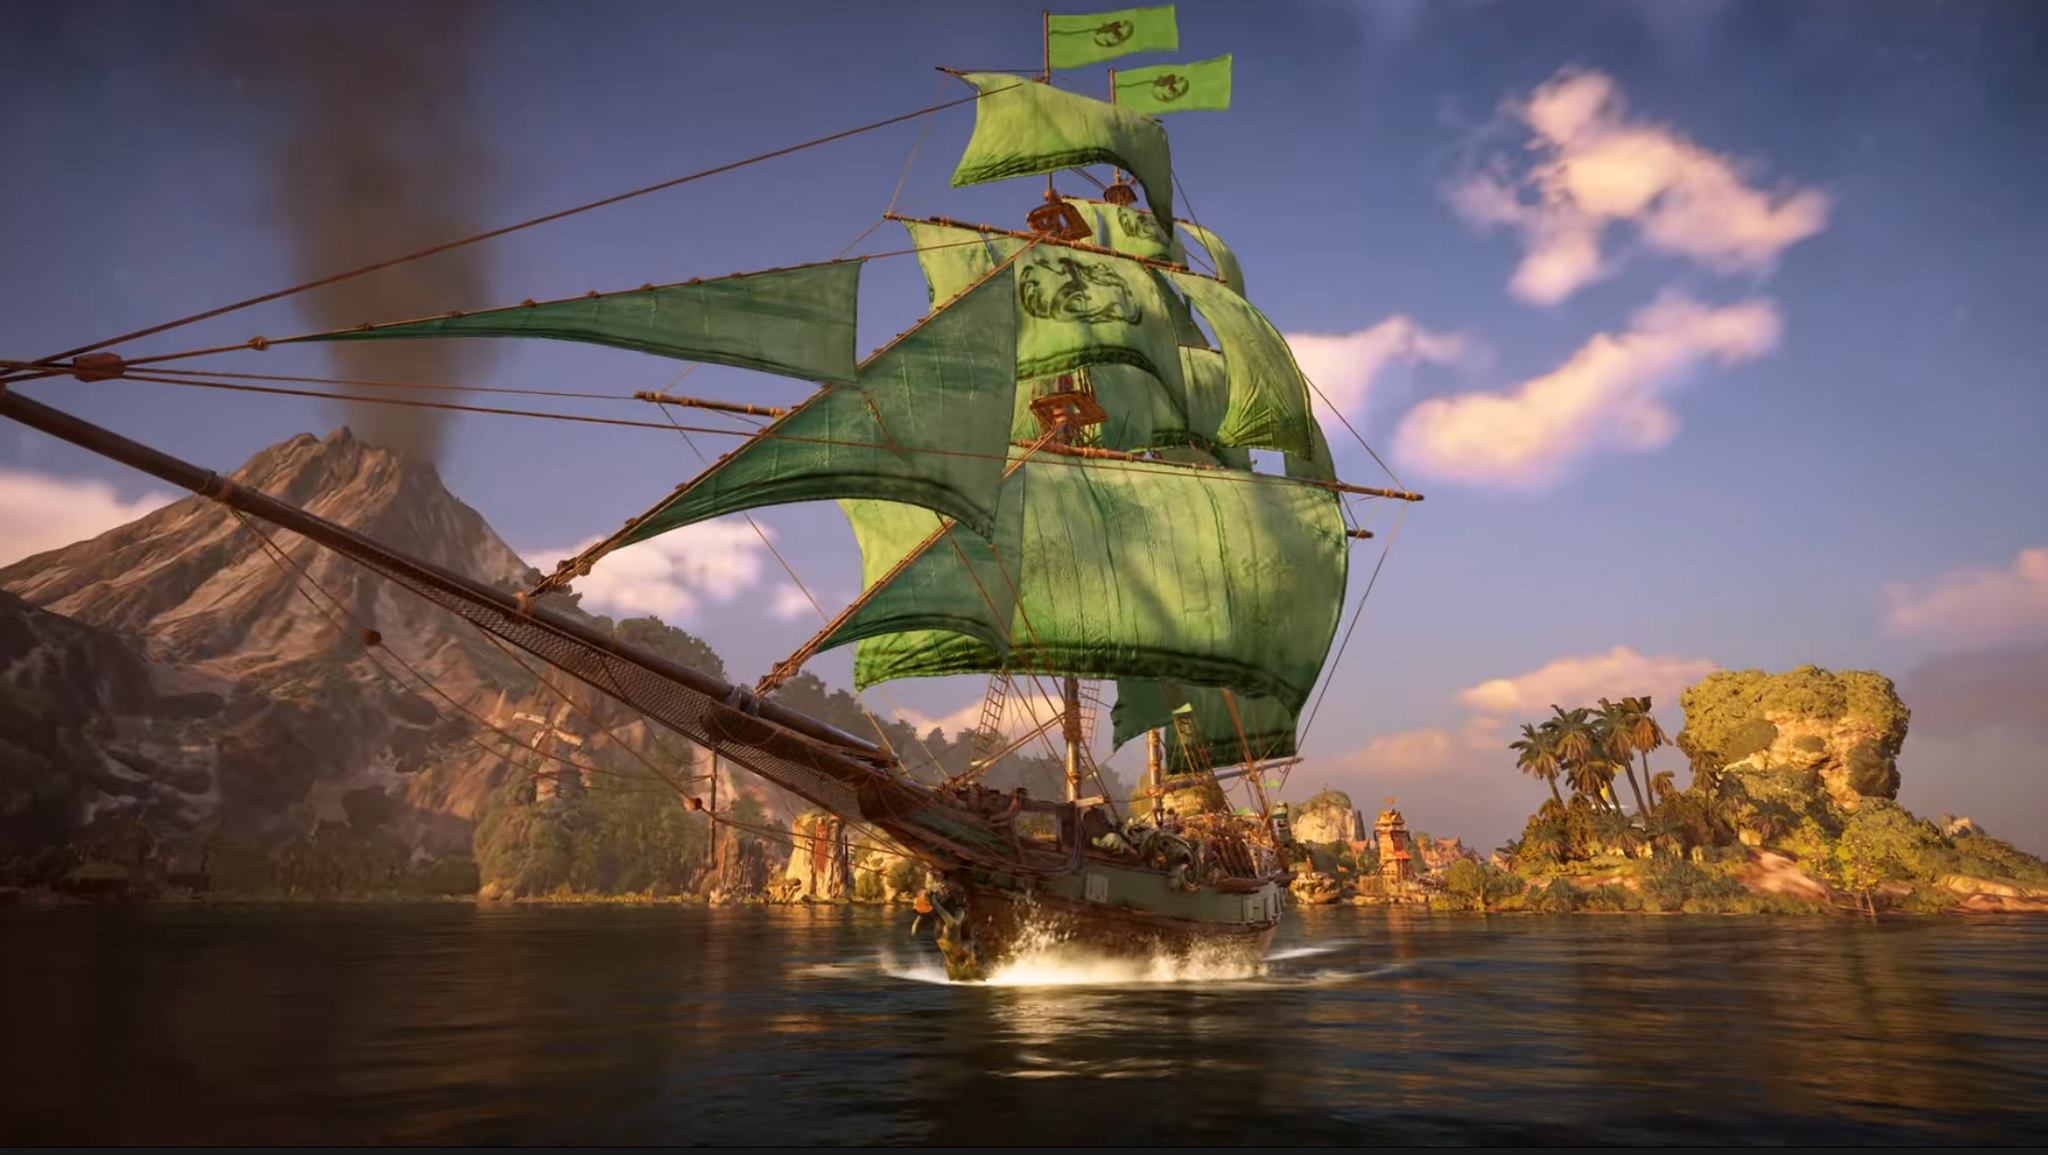 Skull and Bones Release Date Set for November 8, Gameplay Trailer Out